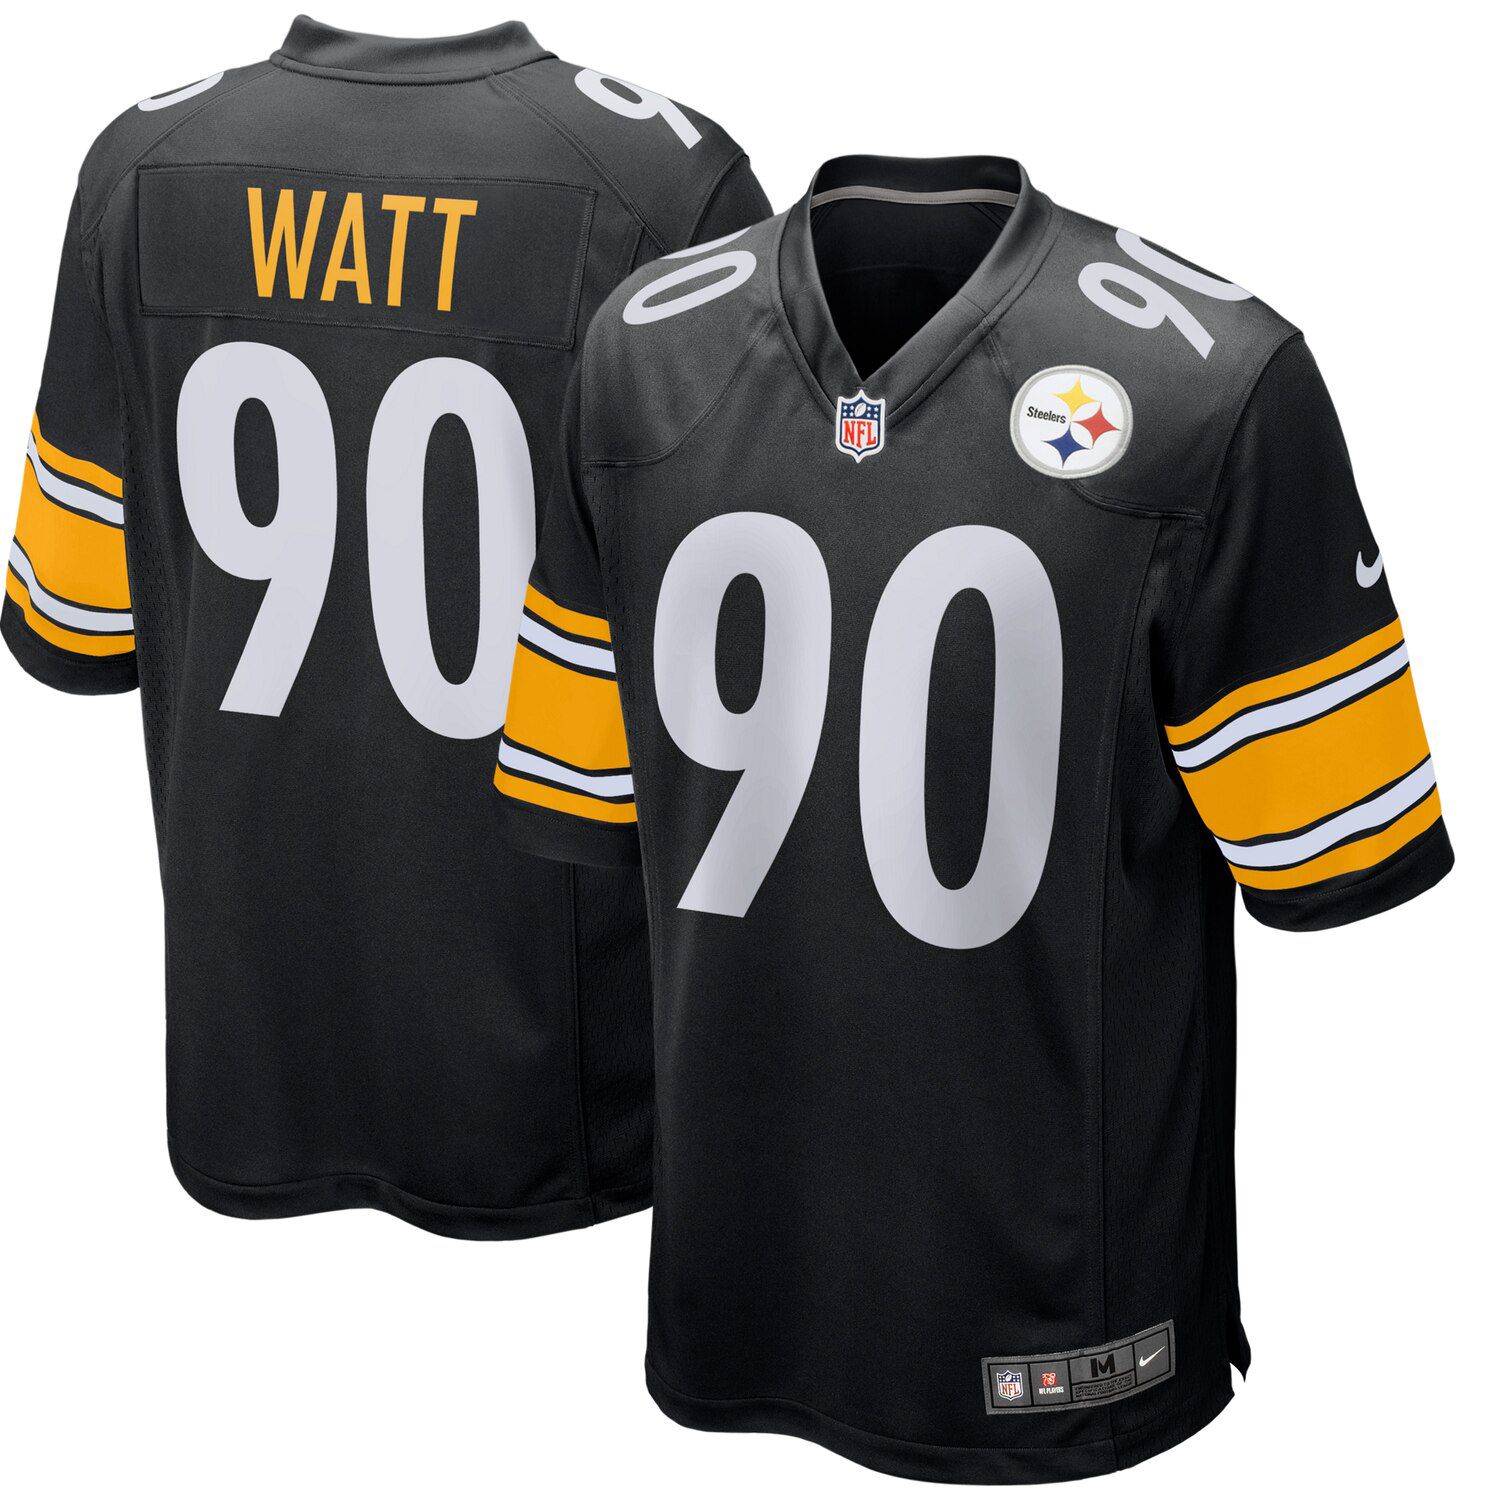 james conner inverted jersey